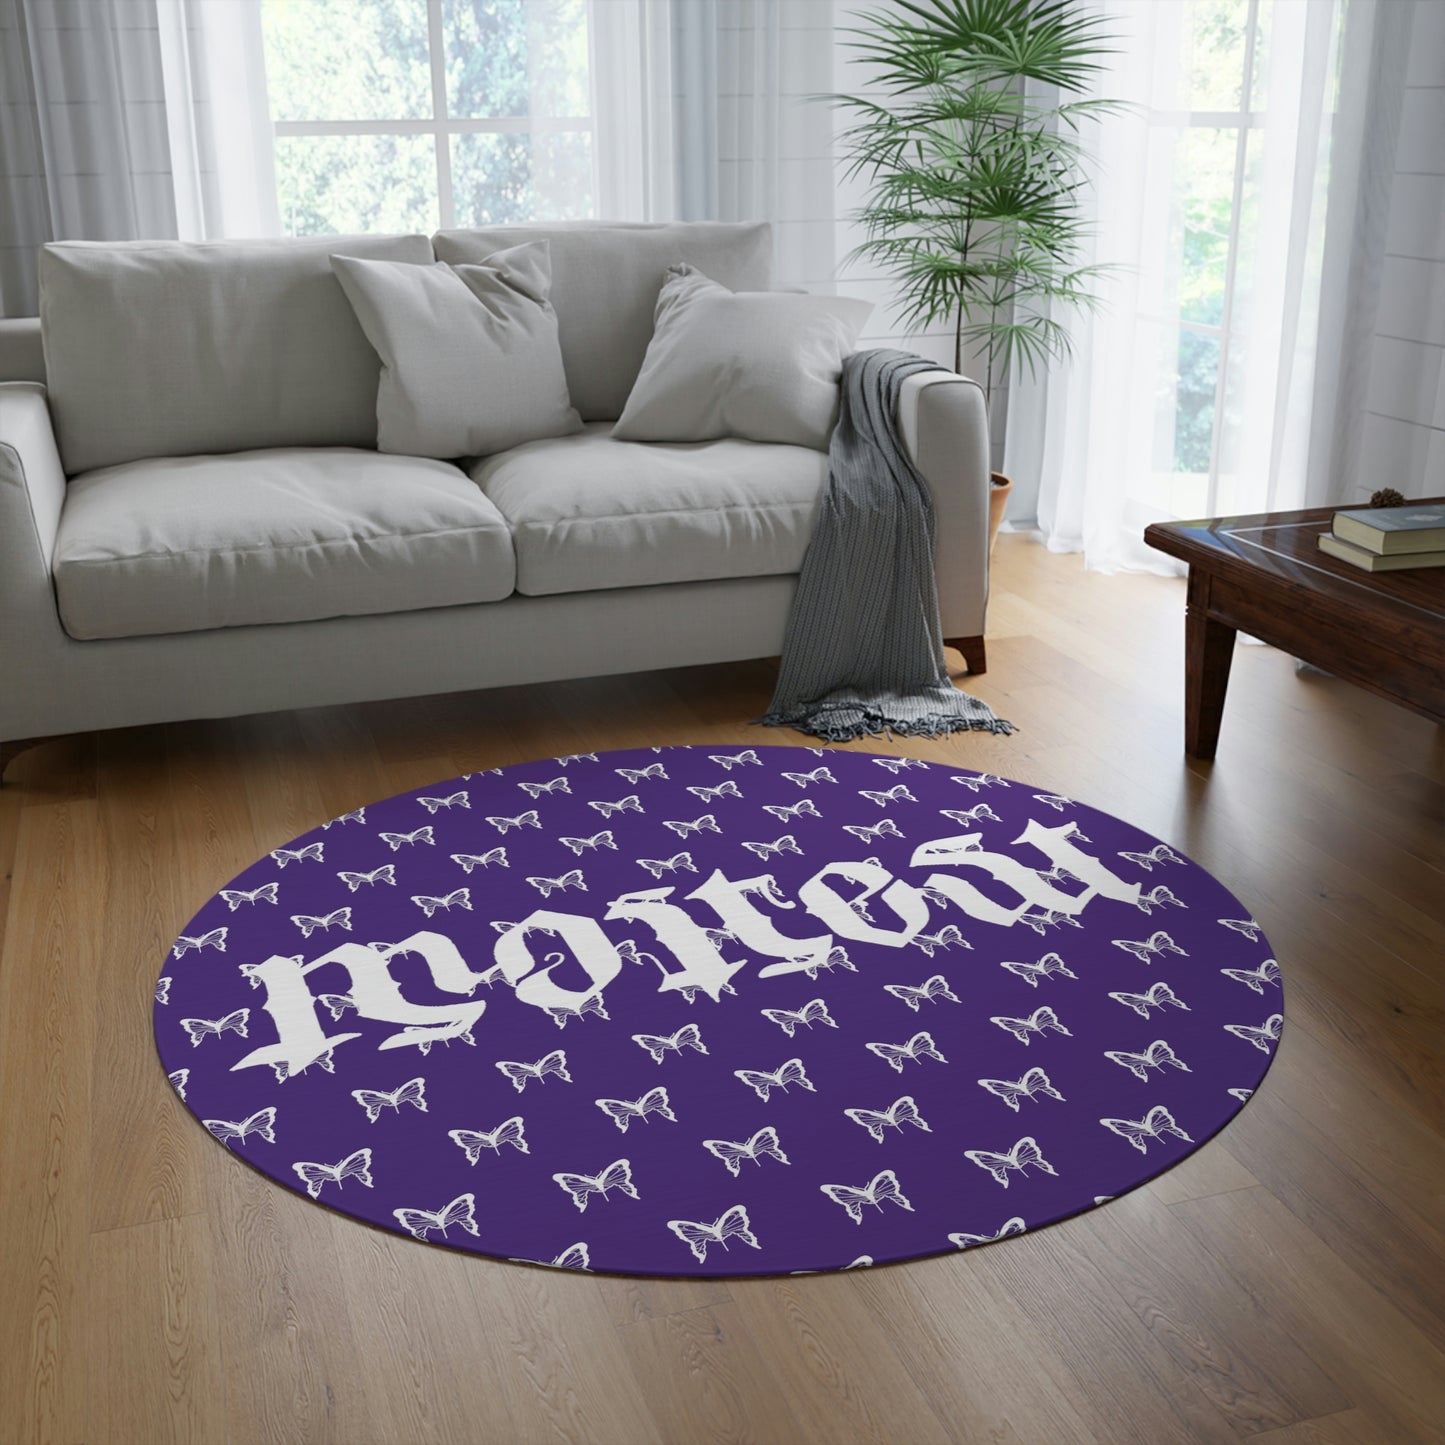 Purple Butterfly Effect 5’ Round Rug